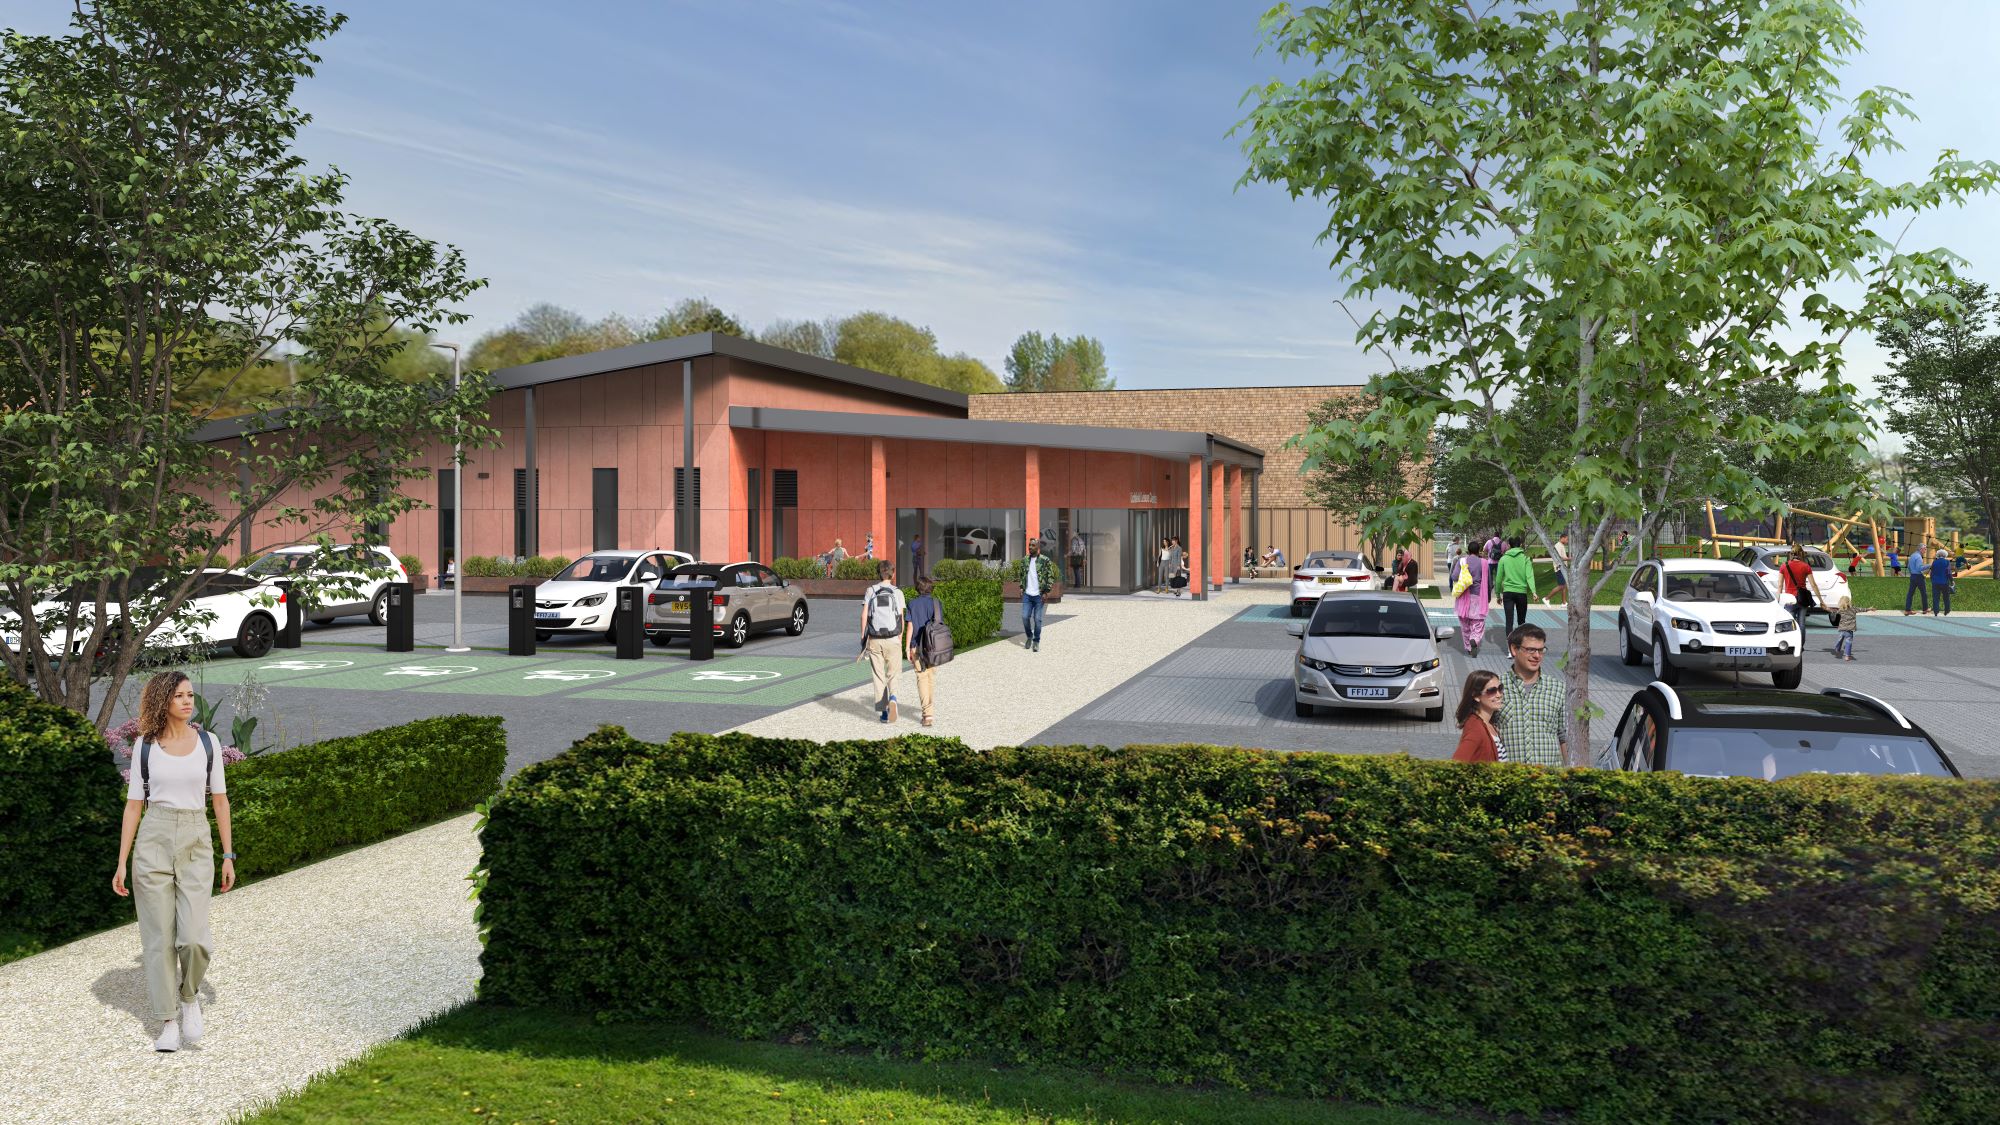 An artist's impression of the planned leisure centre.